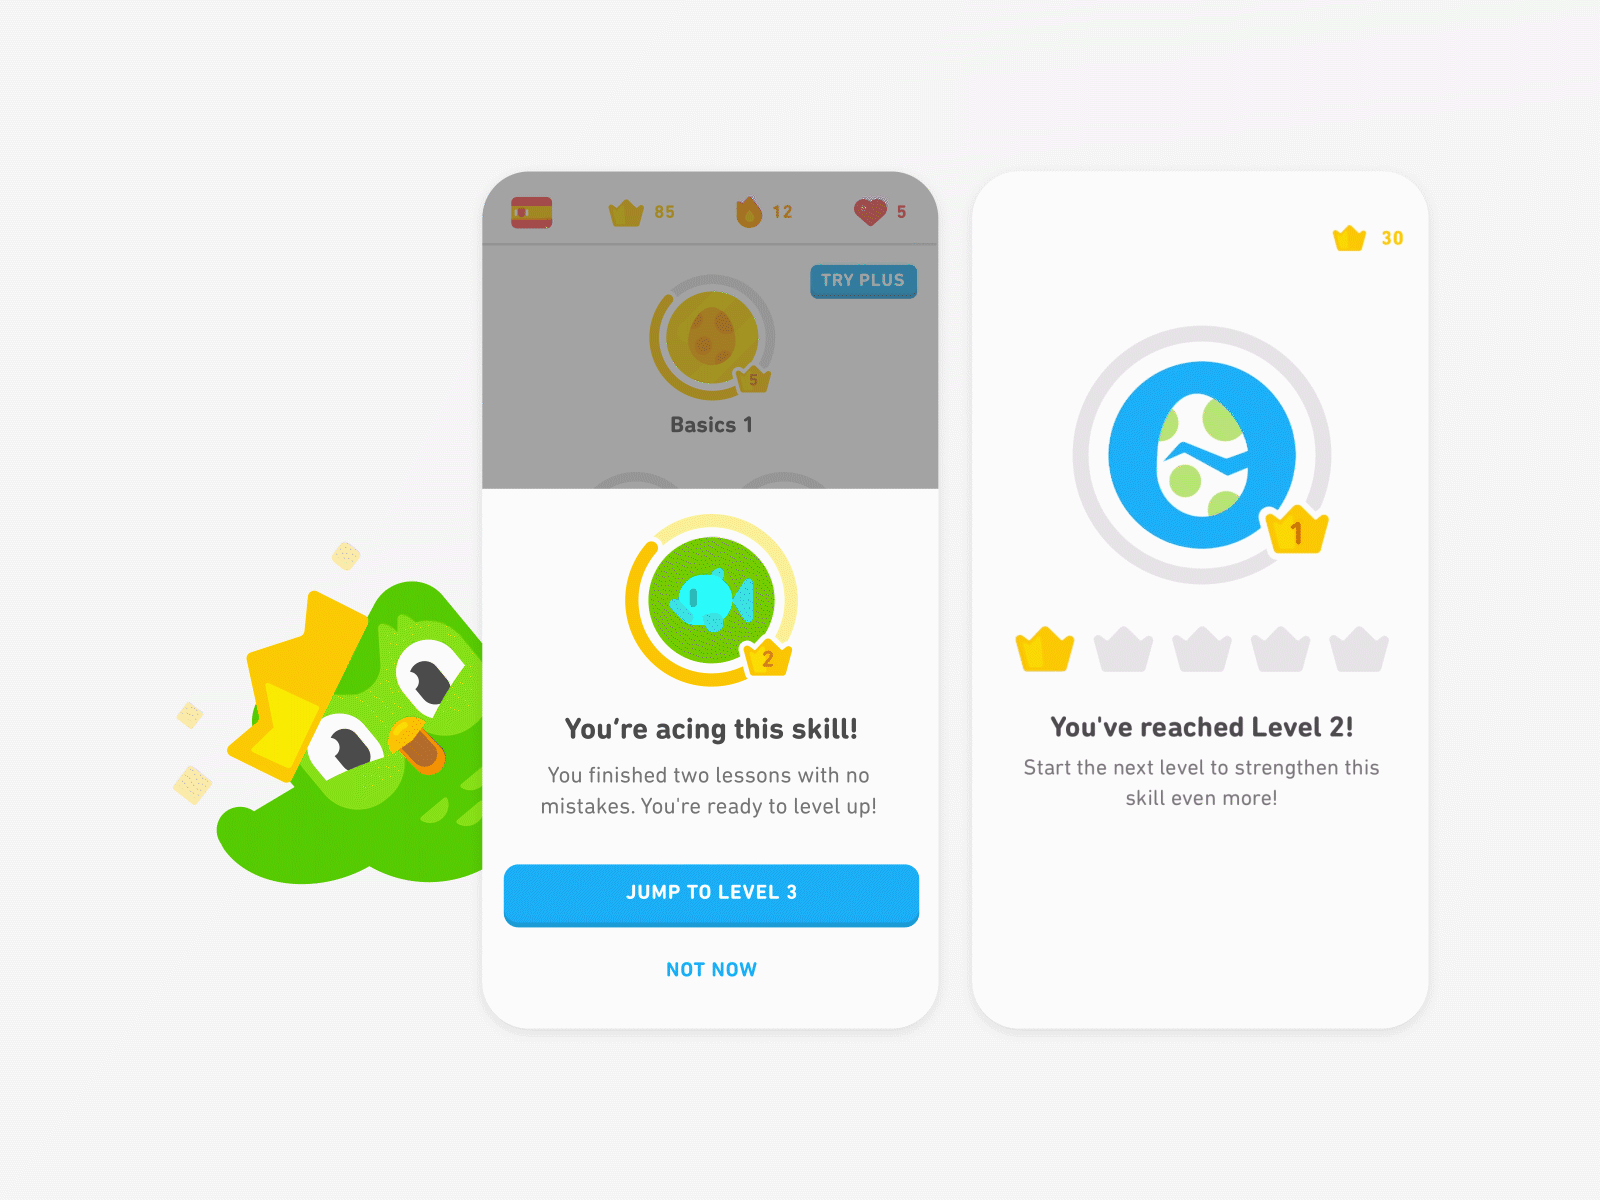 Higher levels, more crowns! count crown duo duolingo game language learning levels progress